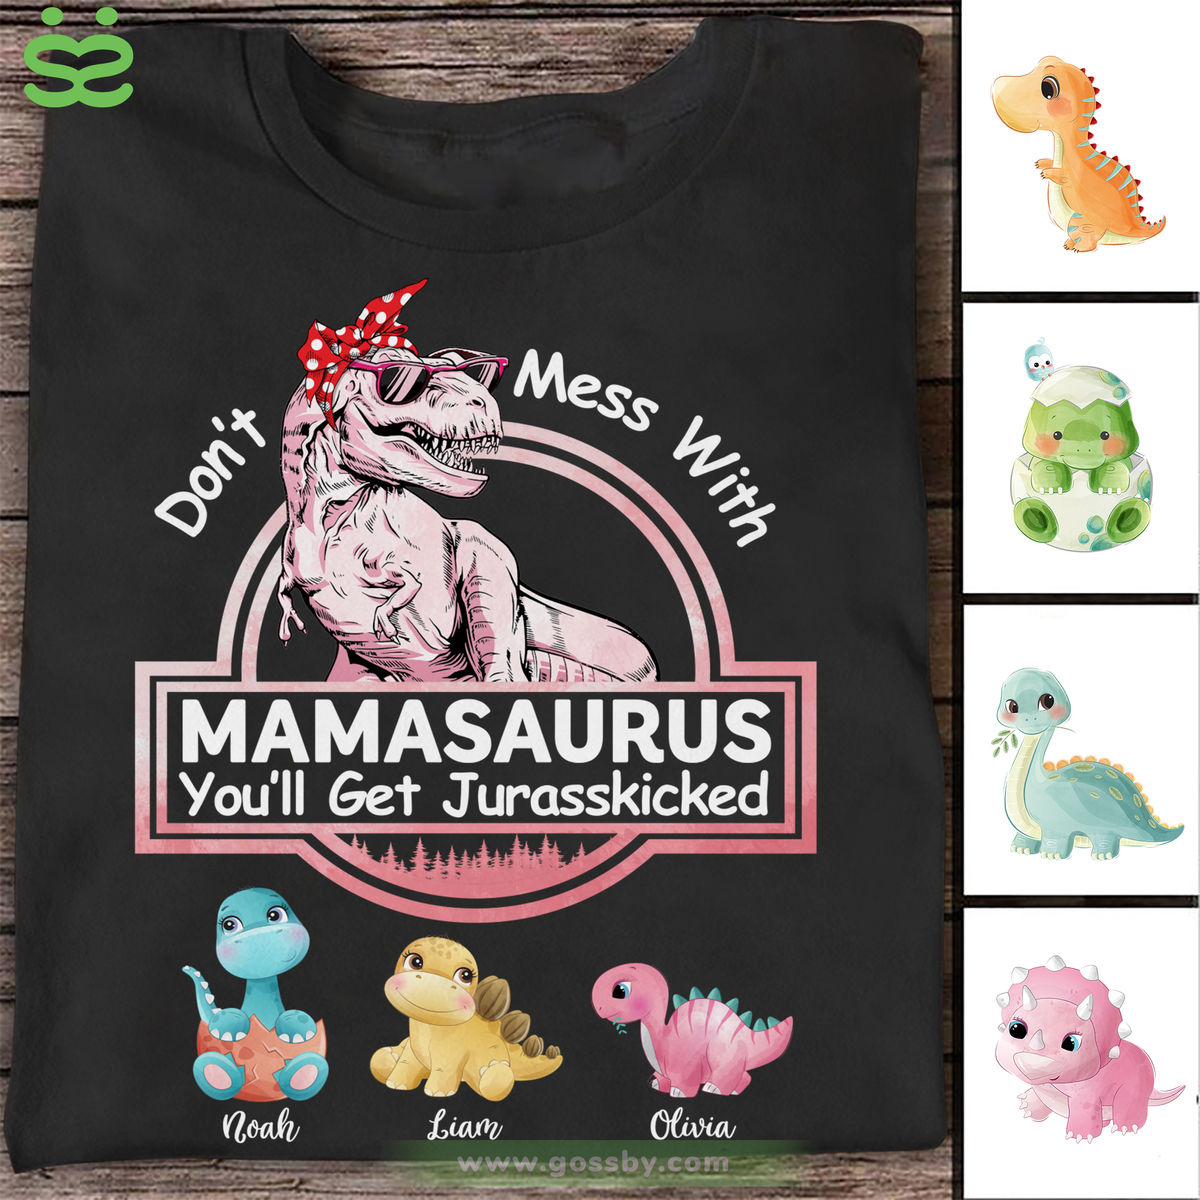 Personalized Shirt - Family - Don't Mess With Mamasaurus - Black_1